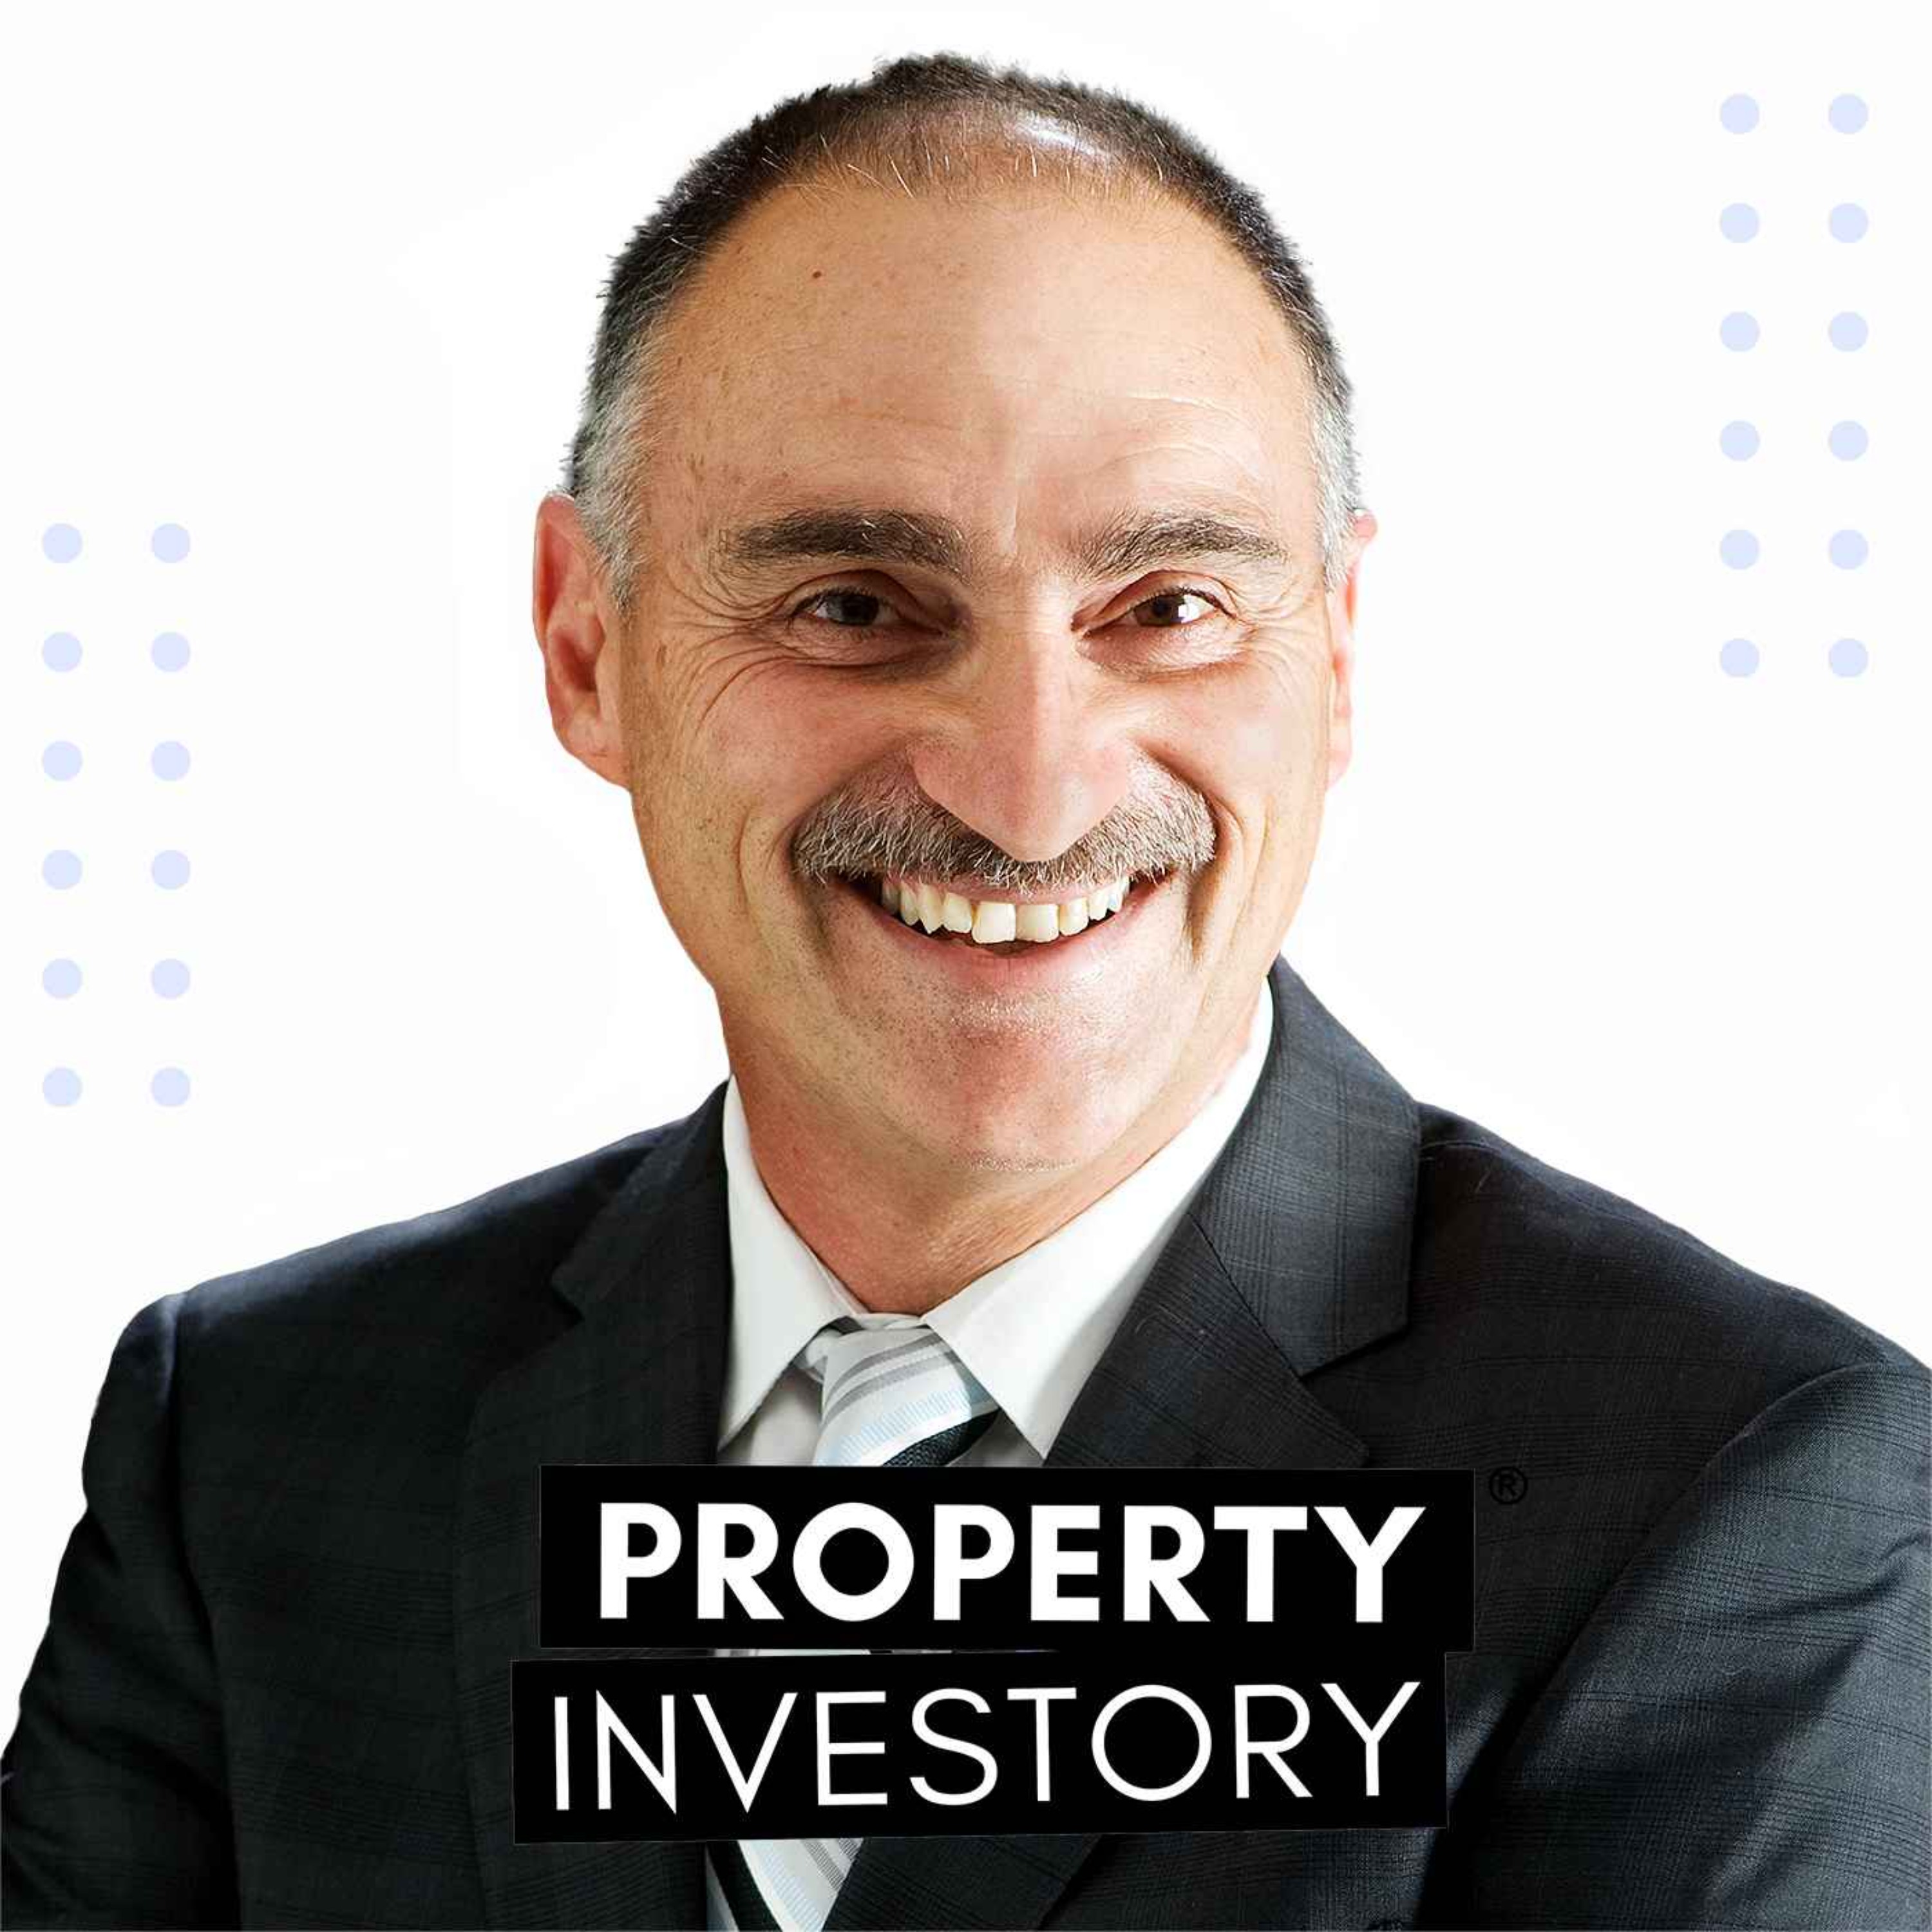 Diverting from teaching to a property investor, how did Peter Koulizos work it out?